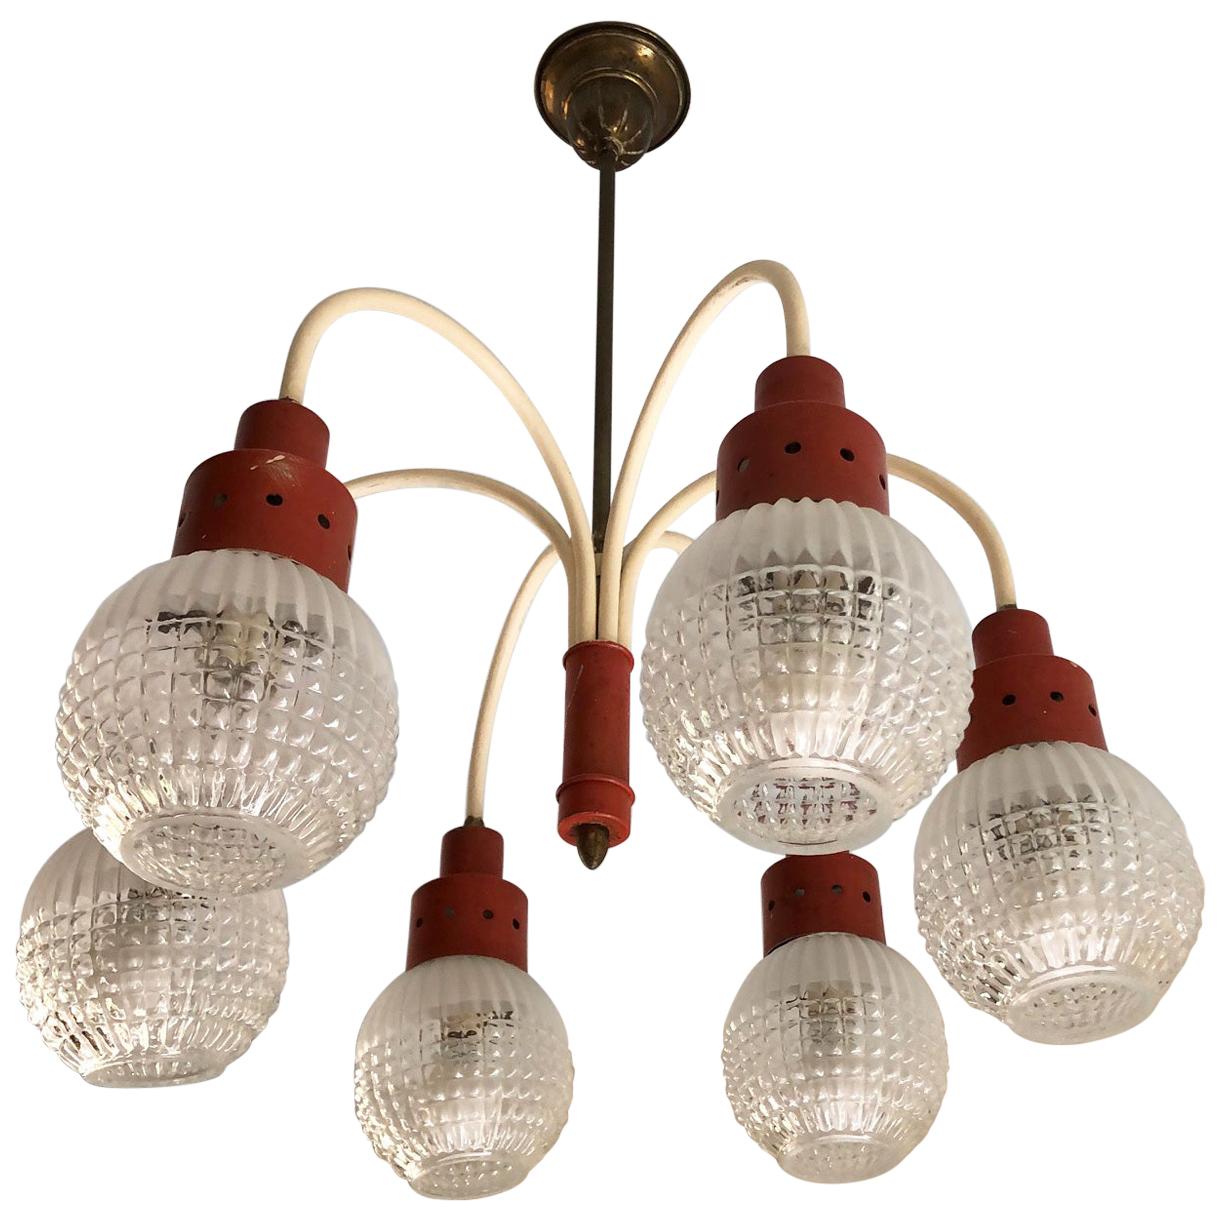 Original Italian Chandelier from 1970s with Six Lights, Orange and Cream Color For Sale